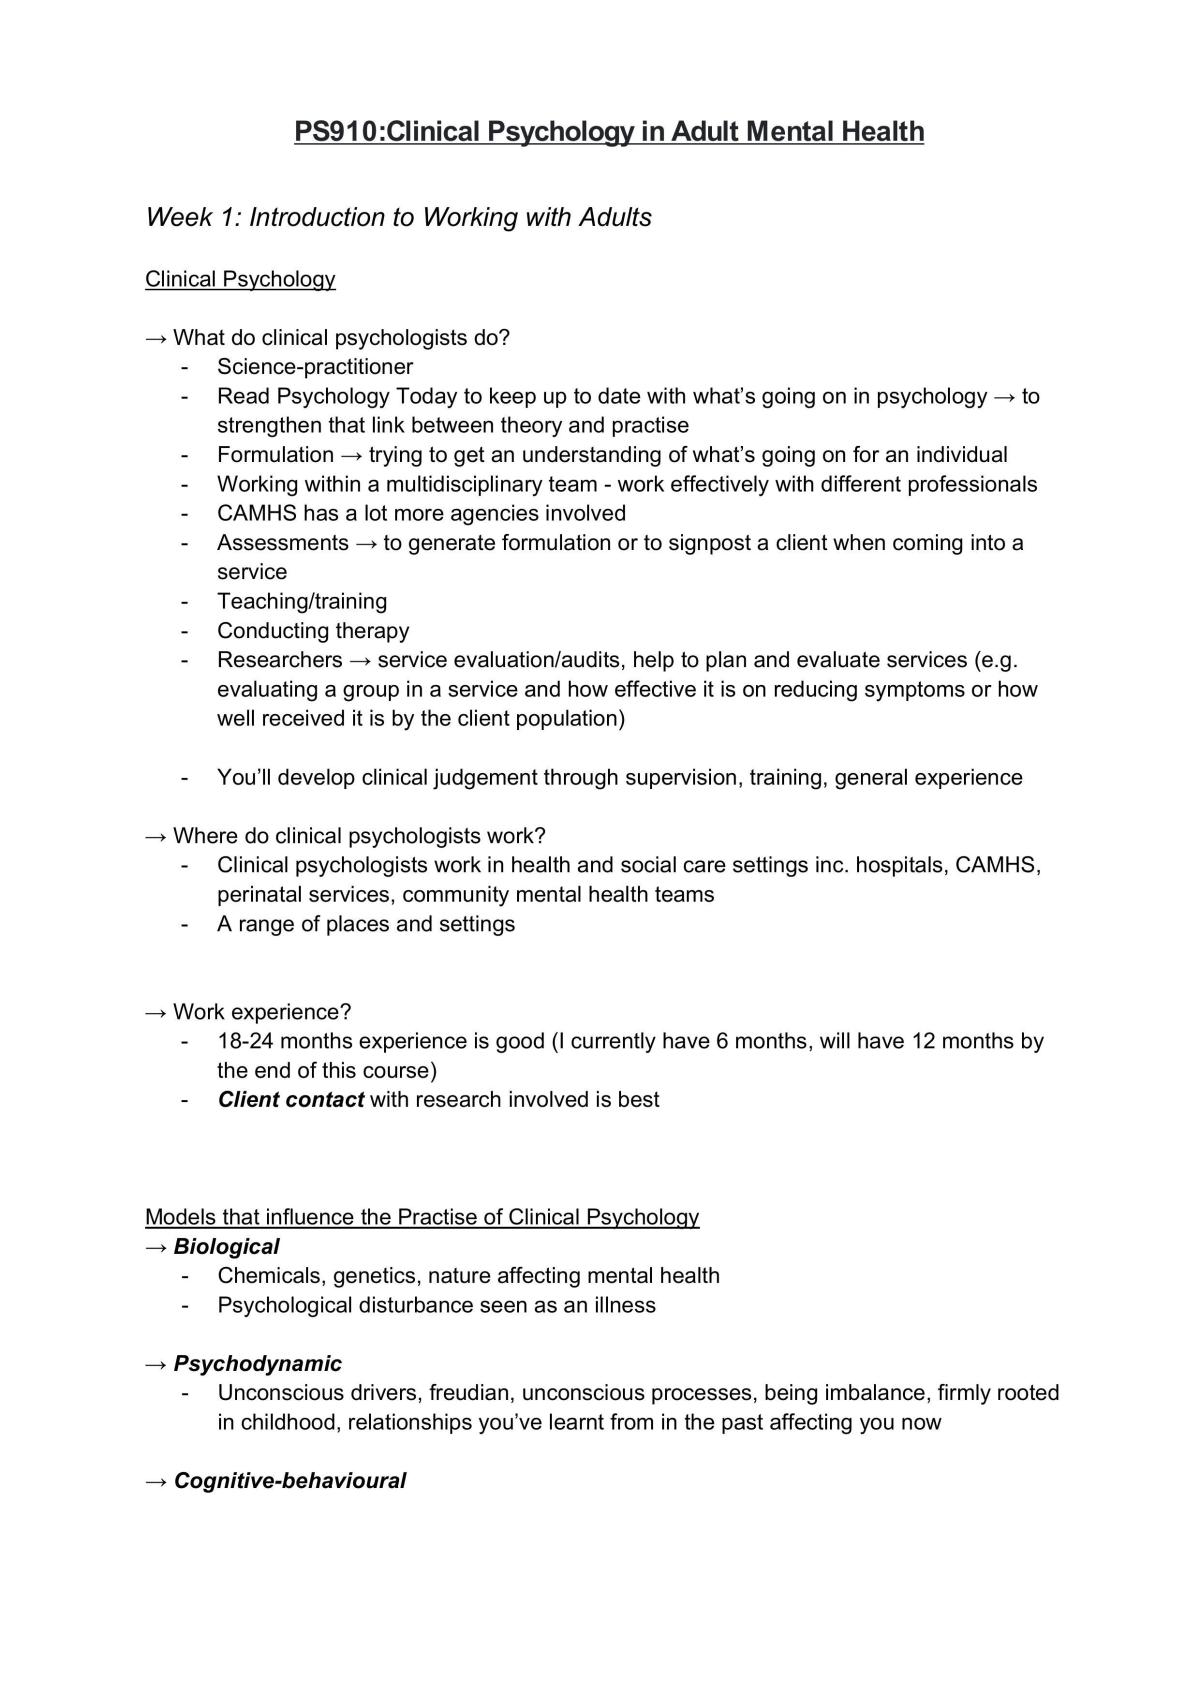 PS910 Clinical Psychology in Adult Mental Health Full Module Notes - Page 1